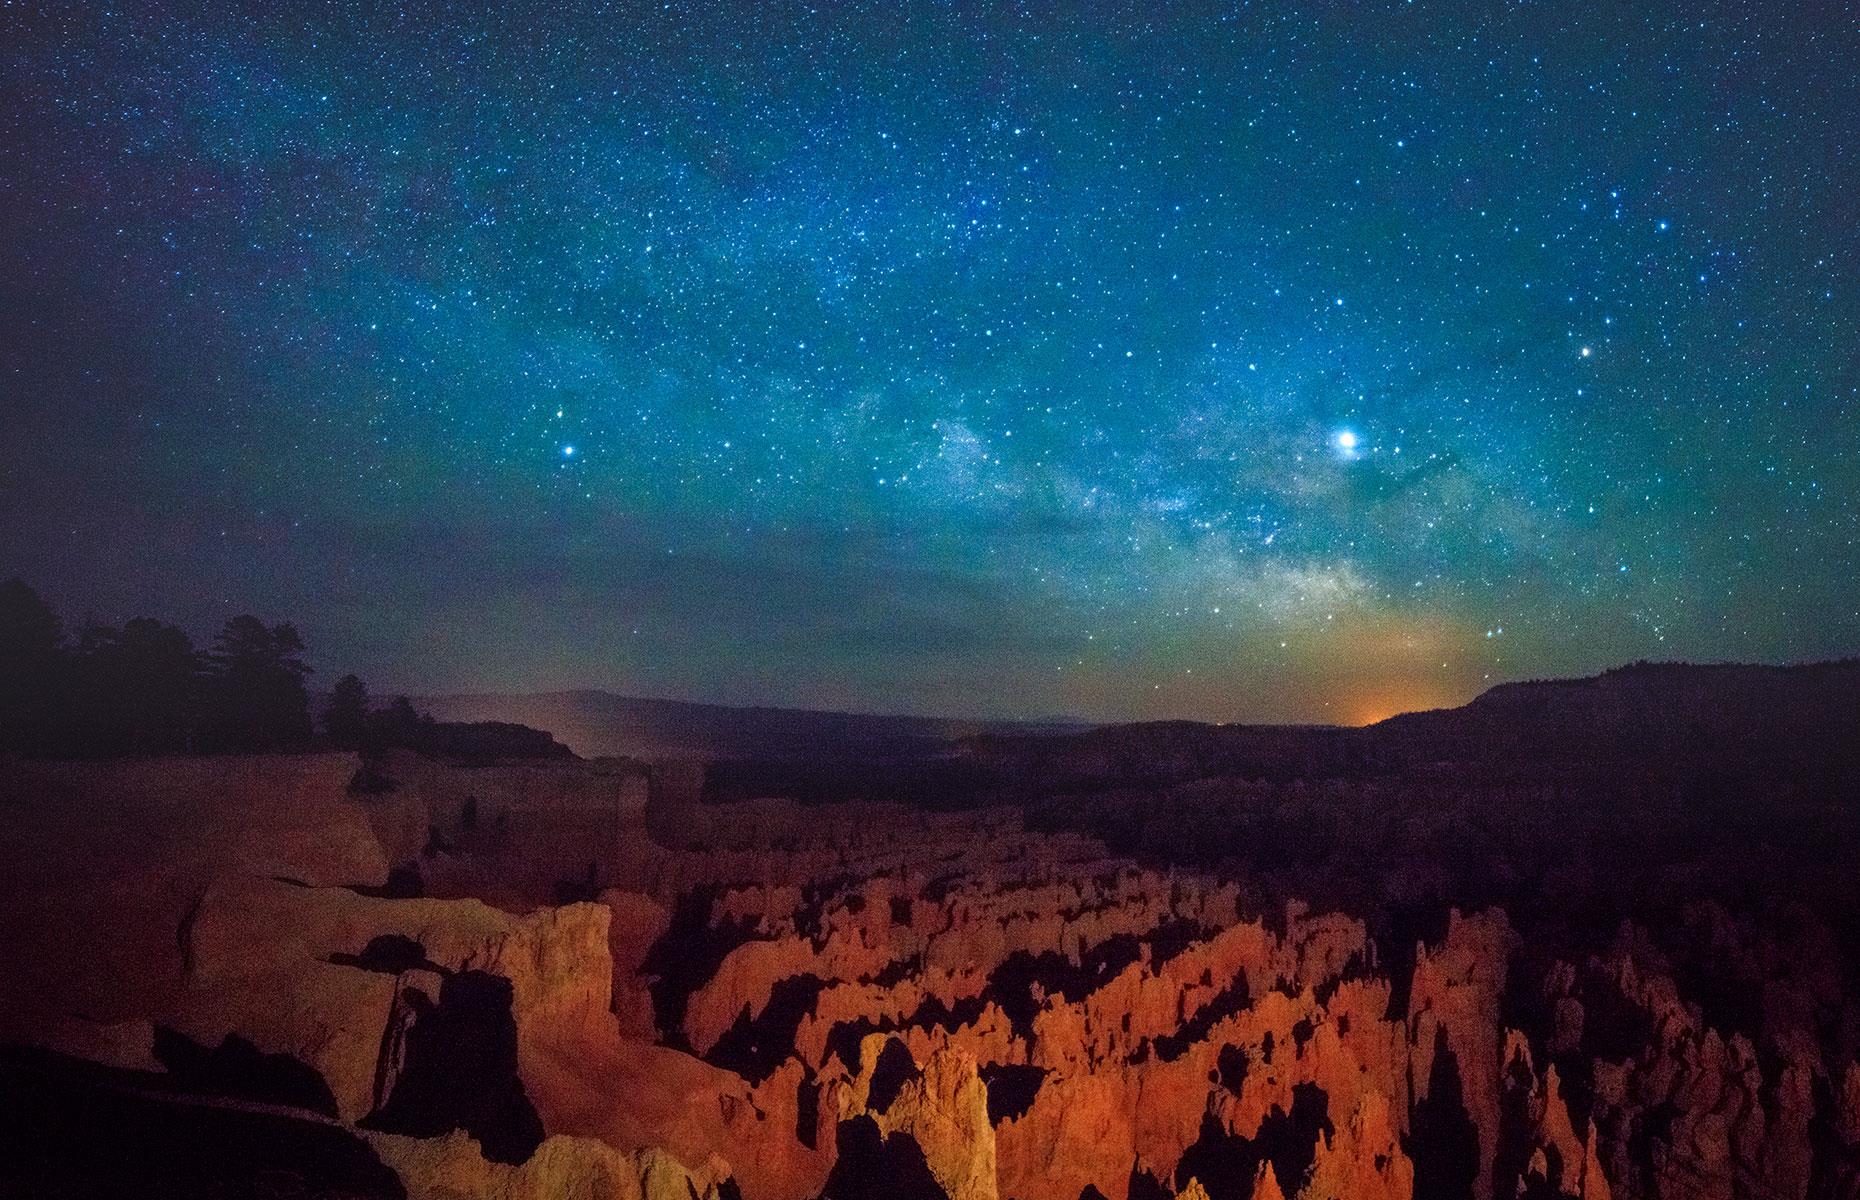 <p>Embark on an exhilarating <a href="https://artsandculture.withgoogle.com/en-us/national-parks-service/bryce-canyon/sunset-point-tour">virtual journey</a> that spans day and night in Bryce Canyon and you'll discover a lot more than just its stunning red rock formations. While this stone jungle and its hoodoos are fascinating up close and a virtual horseback ride through the canyon comes highly recommended, it's the night sky here that will totally surprise you – you can even see the Milky Way. Take a look at <a href="https://www.loveexploring.com/galleries/94776/99-beautiful-things-we-love-about-america?page=1">99 other amazing things we love about America</a>.</p>